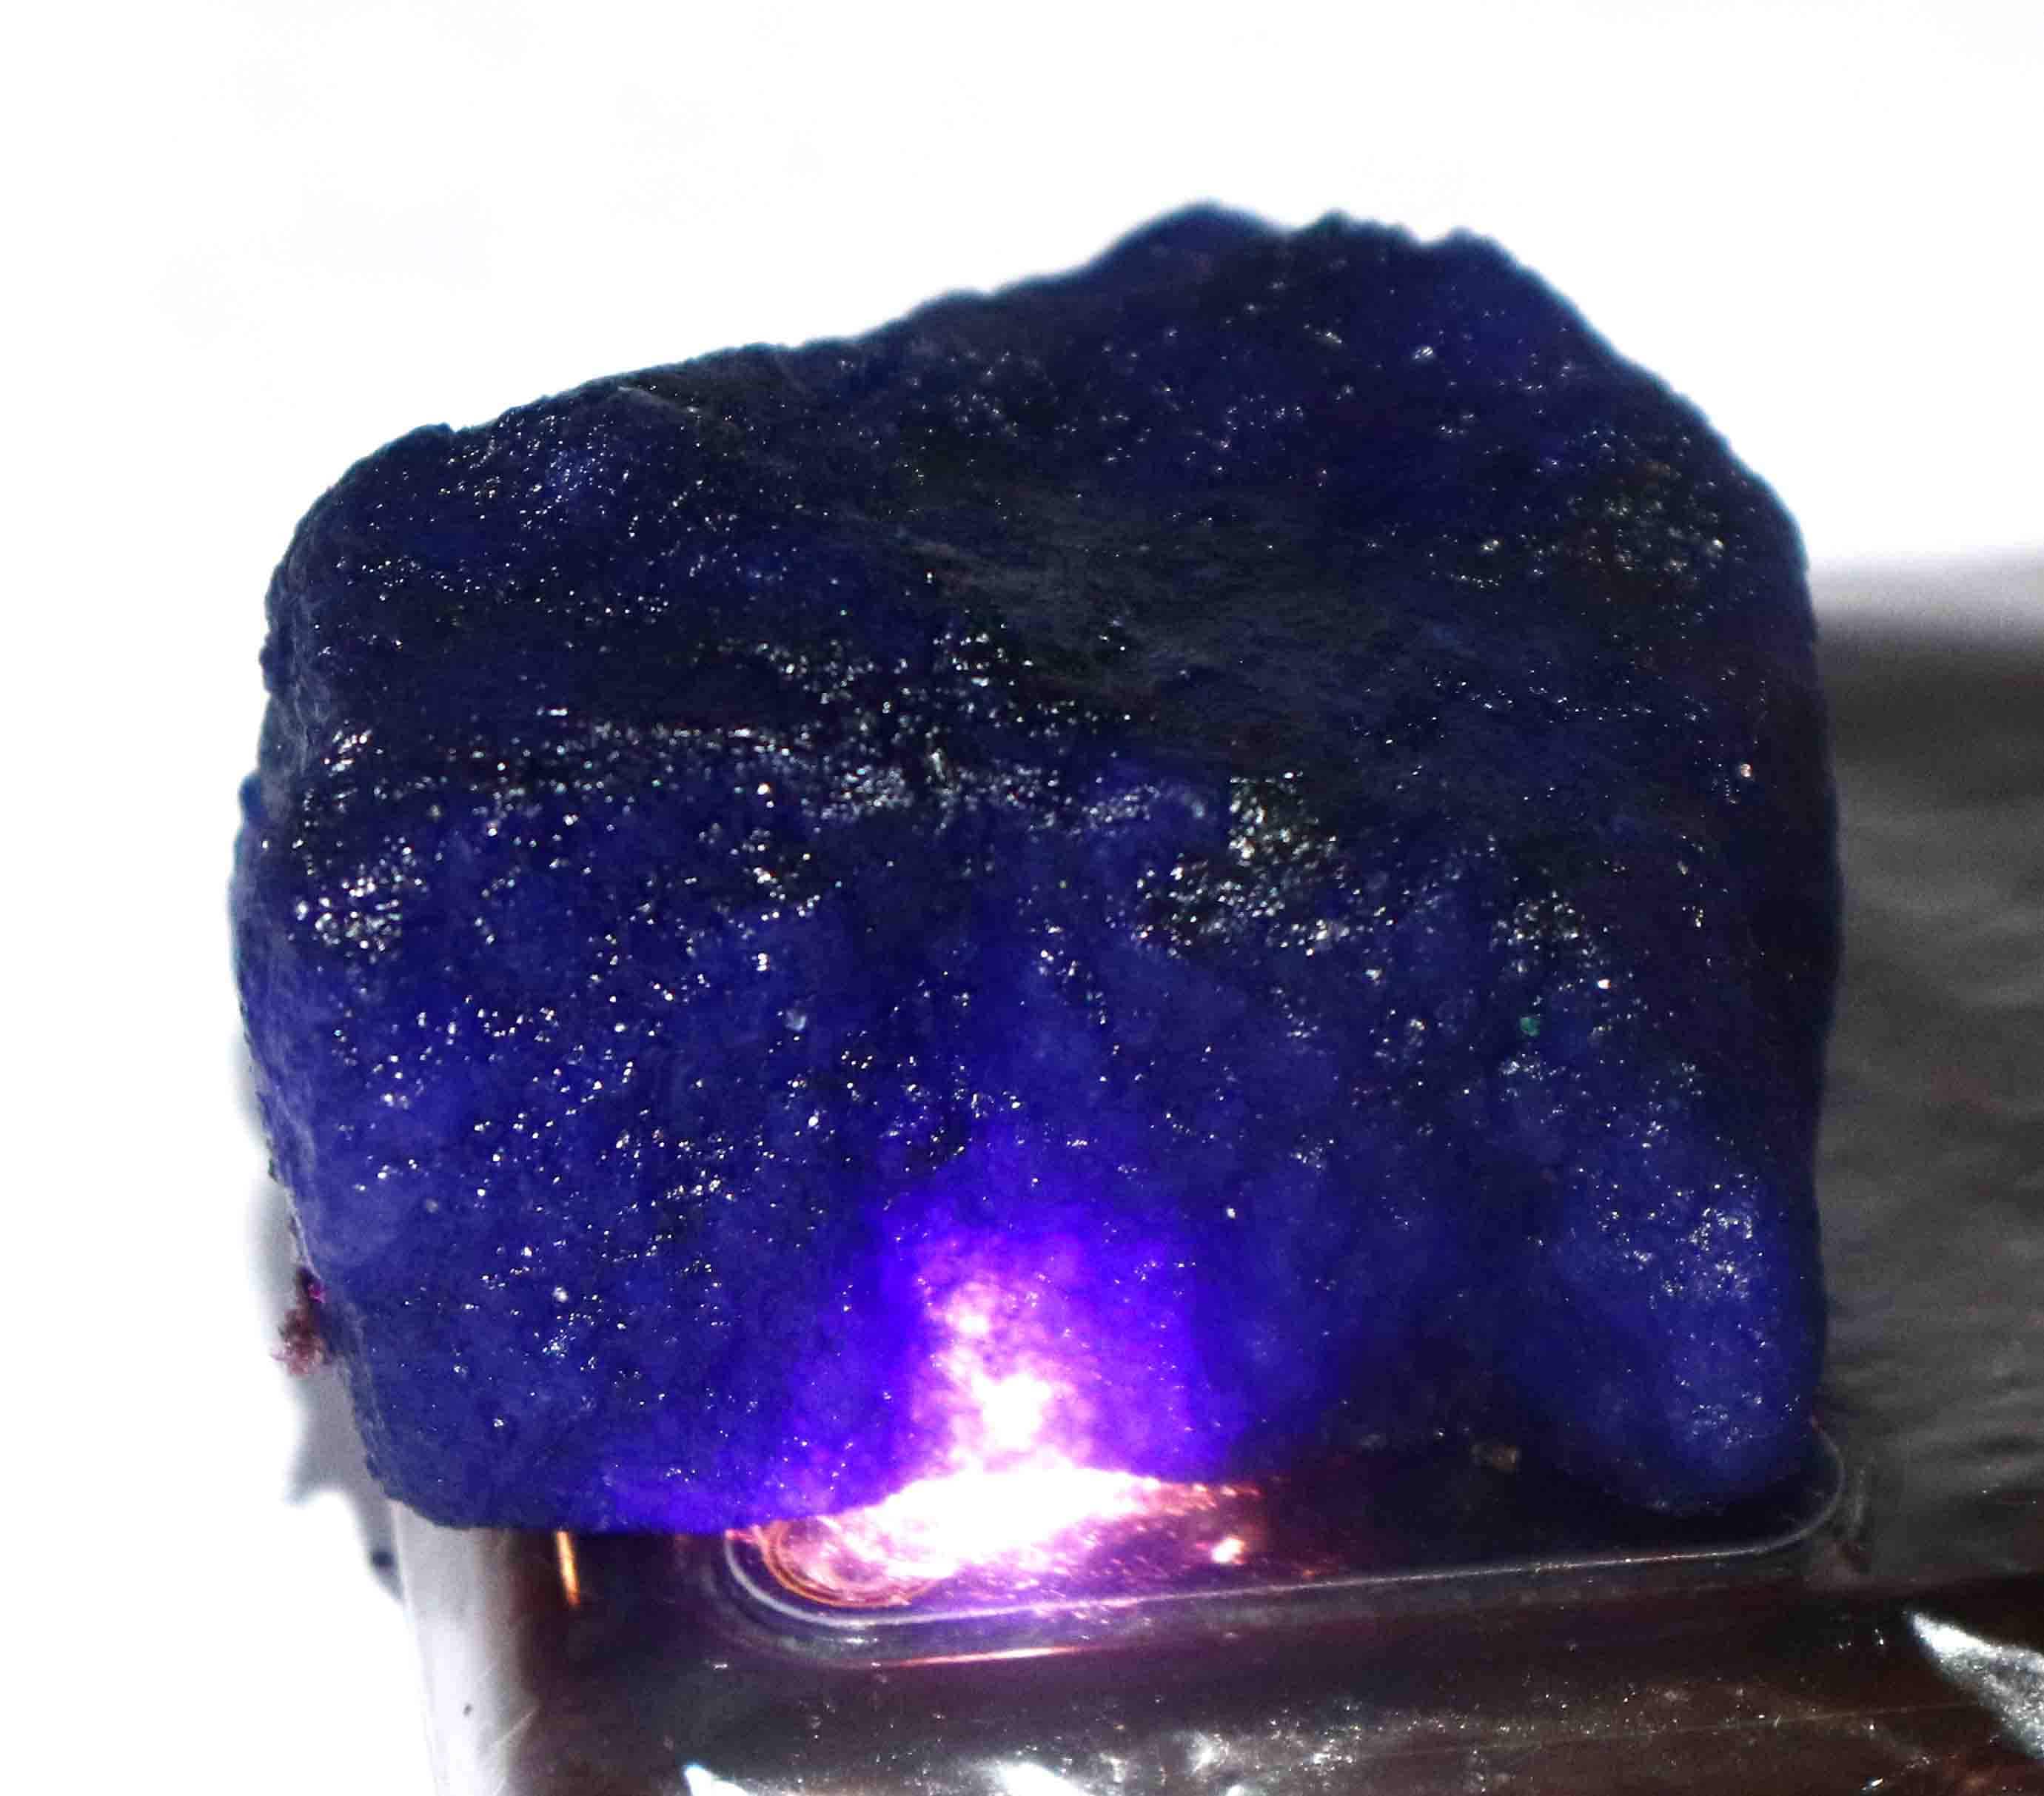 63mmx54mmx36mm Uncut Shape Earth Mined Certified Natural African Blue Sapphire Loose Gemstone Rough AV900 833.10 Ct